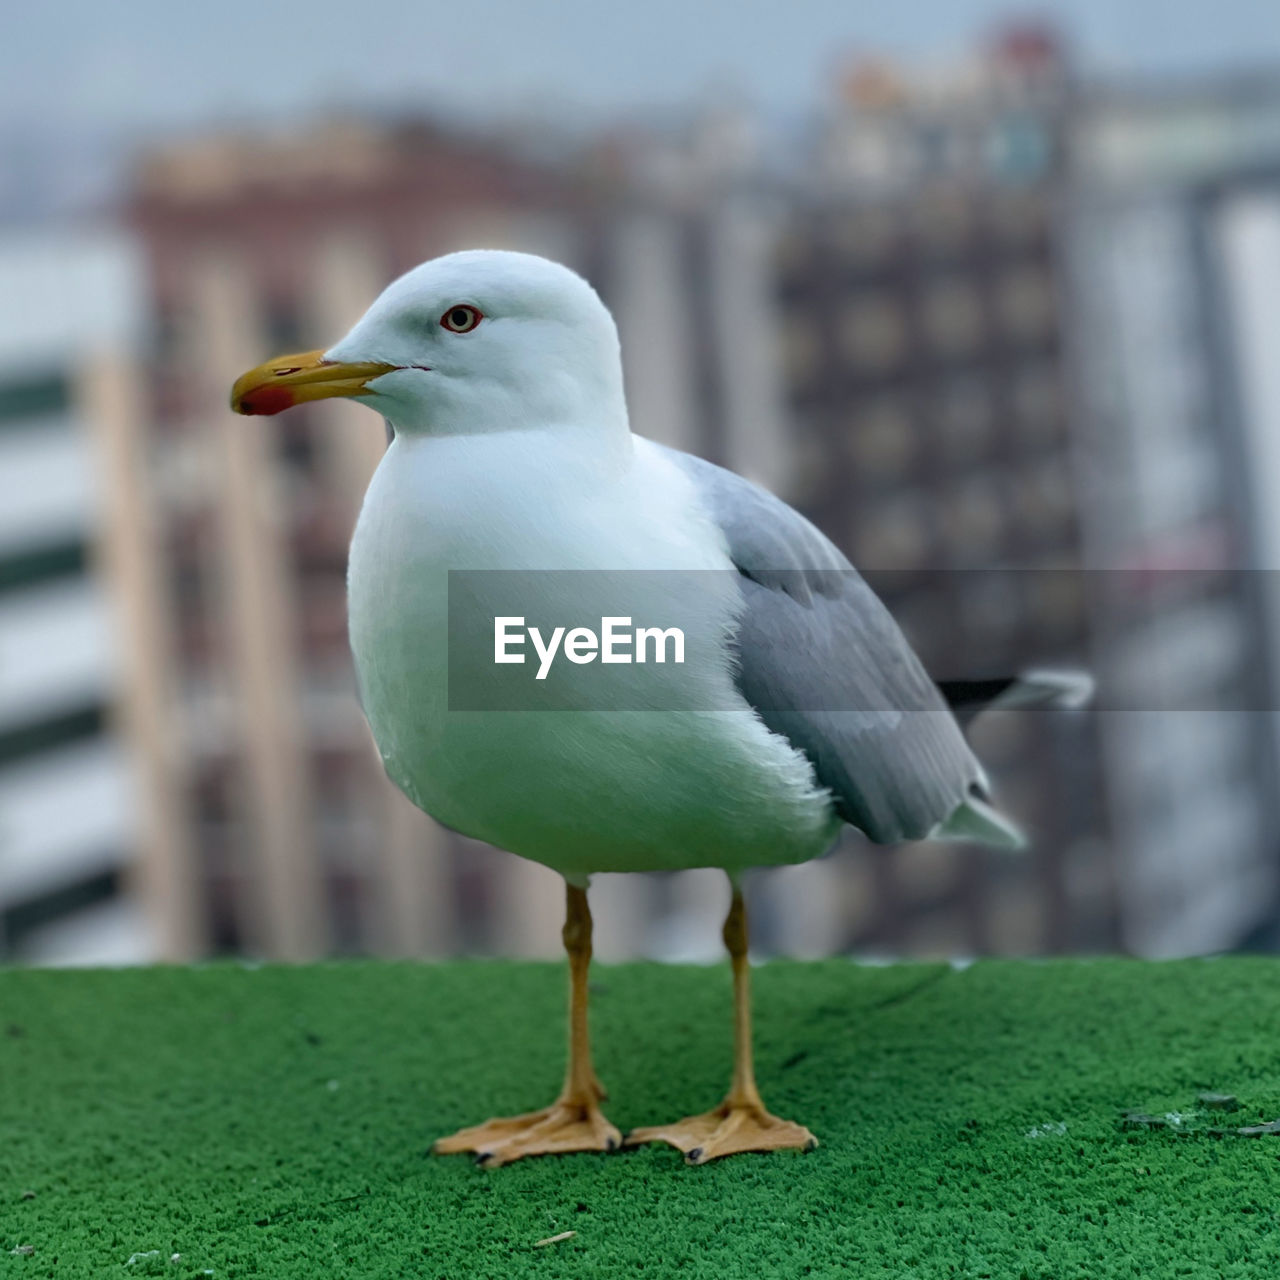 bird, animal themes, animal, animal wildlife, wildlife, gull, one animal, seabird, european herring gull, beak, seagull, architecture, nature, full length, focus on foreground, no people, building exterior, day, perching, great black-backed gull, built structure, green, outdoors, close-up